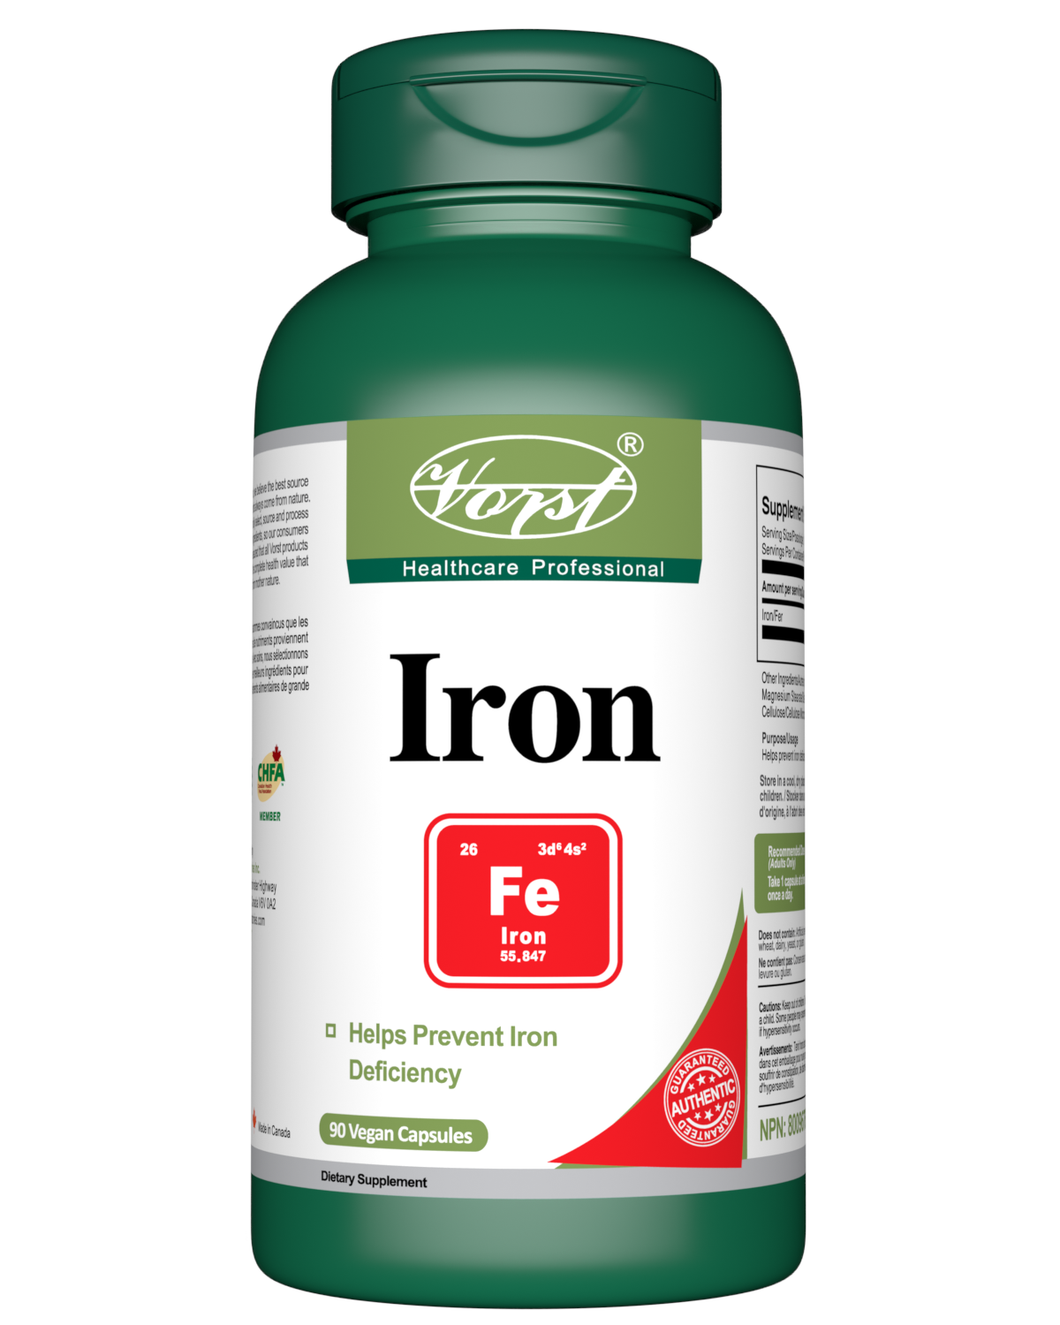 Iron Supplement Max Strength 45mg 90 Vegan Capsules Bottle Front